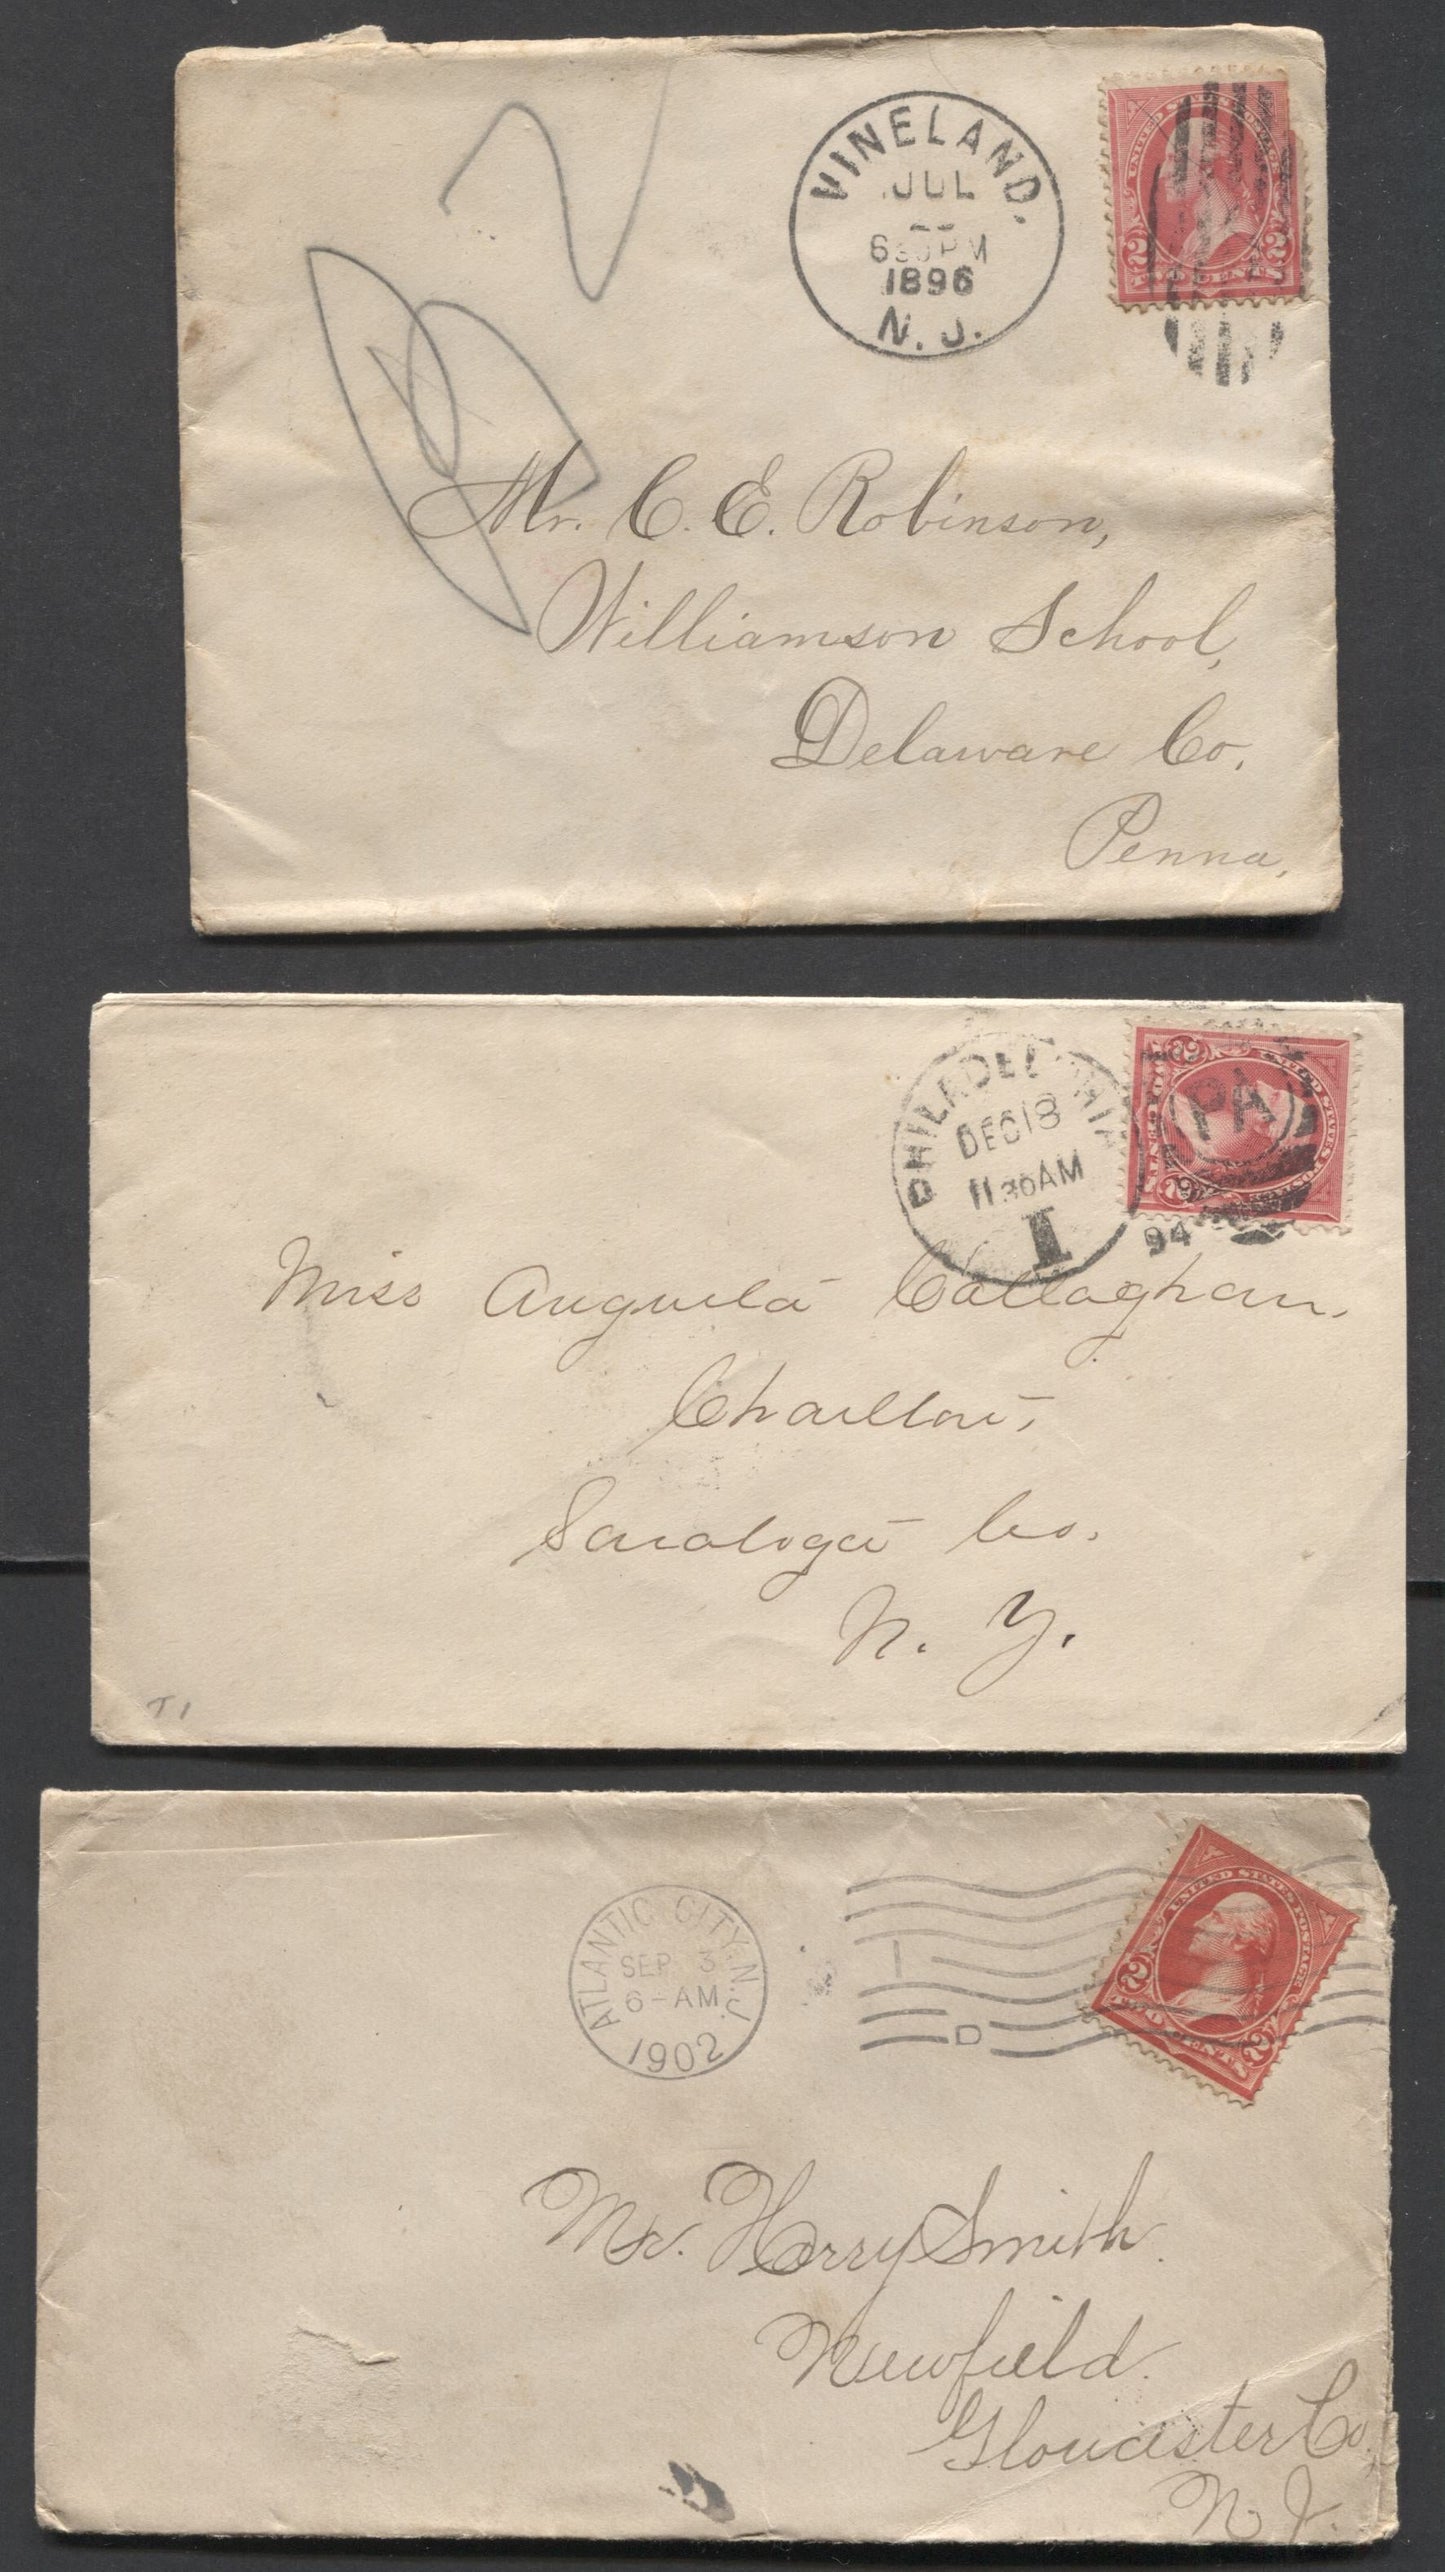 Lot 9 United States  #250a, 250, 267, 279B, 300, 319Fj 1894-1908 1c Green Franklin and 2c Carmine Rose/red Washington Bureau Banknotes, Group of 7 Covers, Different Types, Cat. $12.90 USD